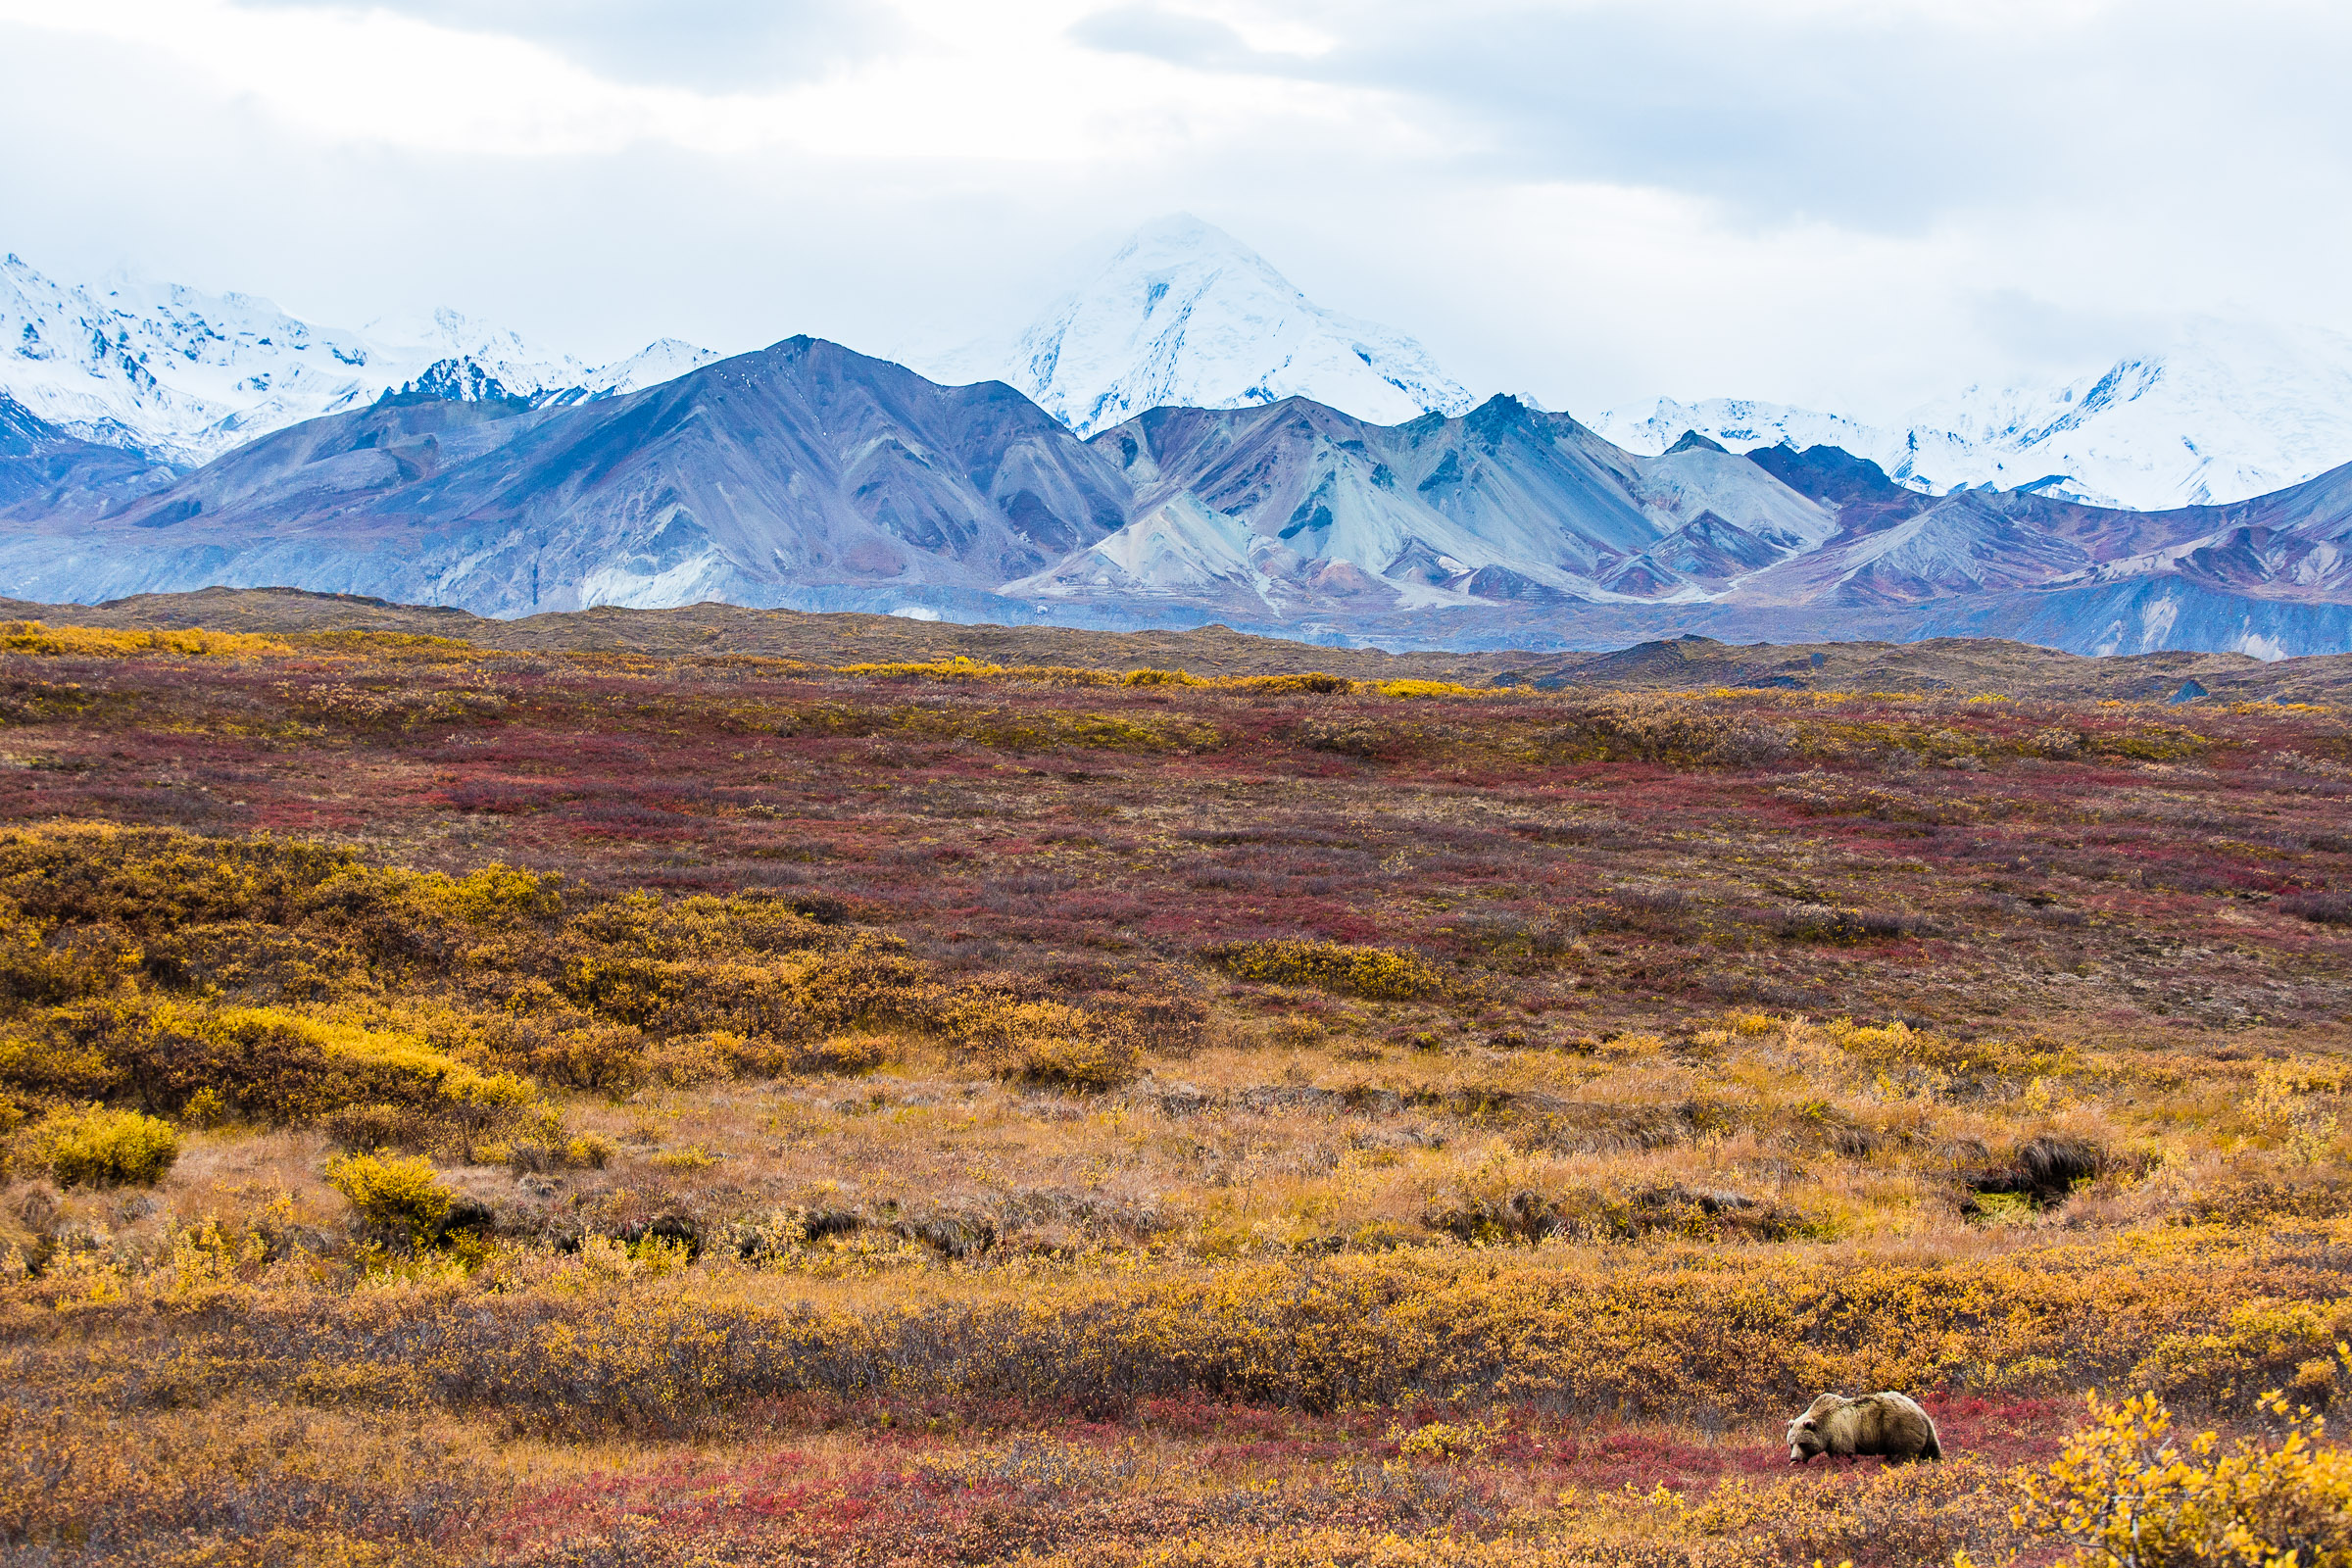 Bear with the base of Denali in the background From Denali National Park in Alaska.